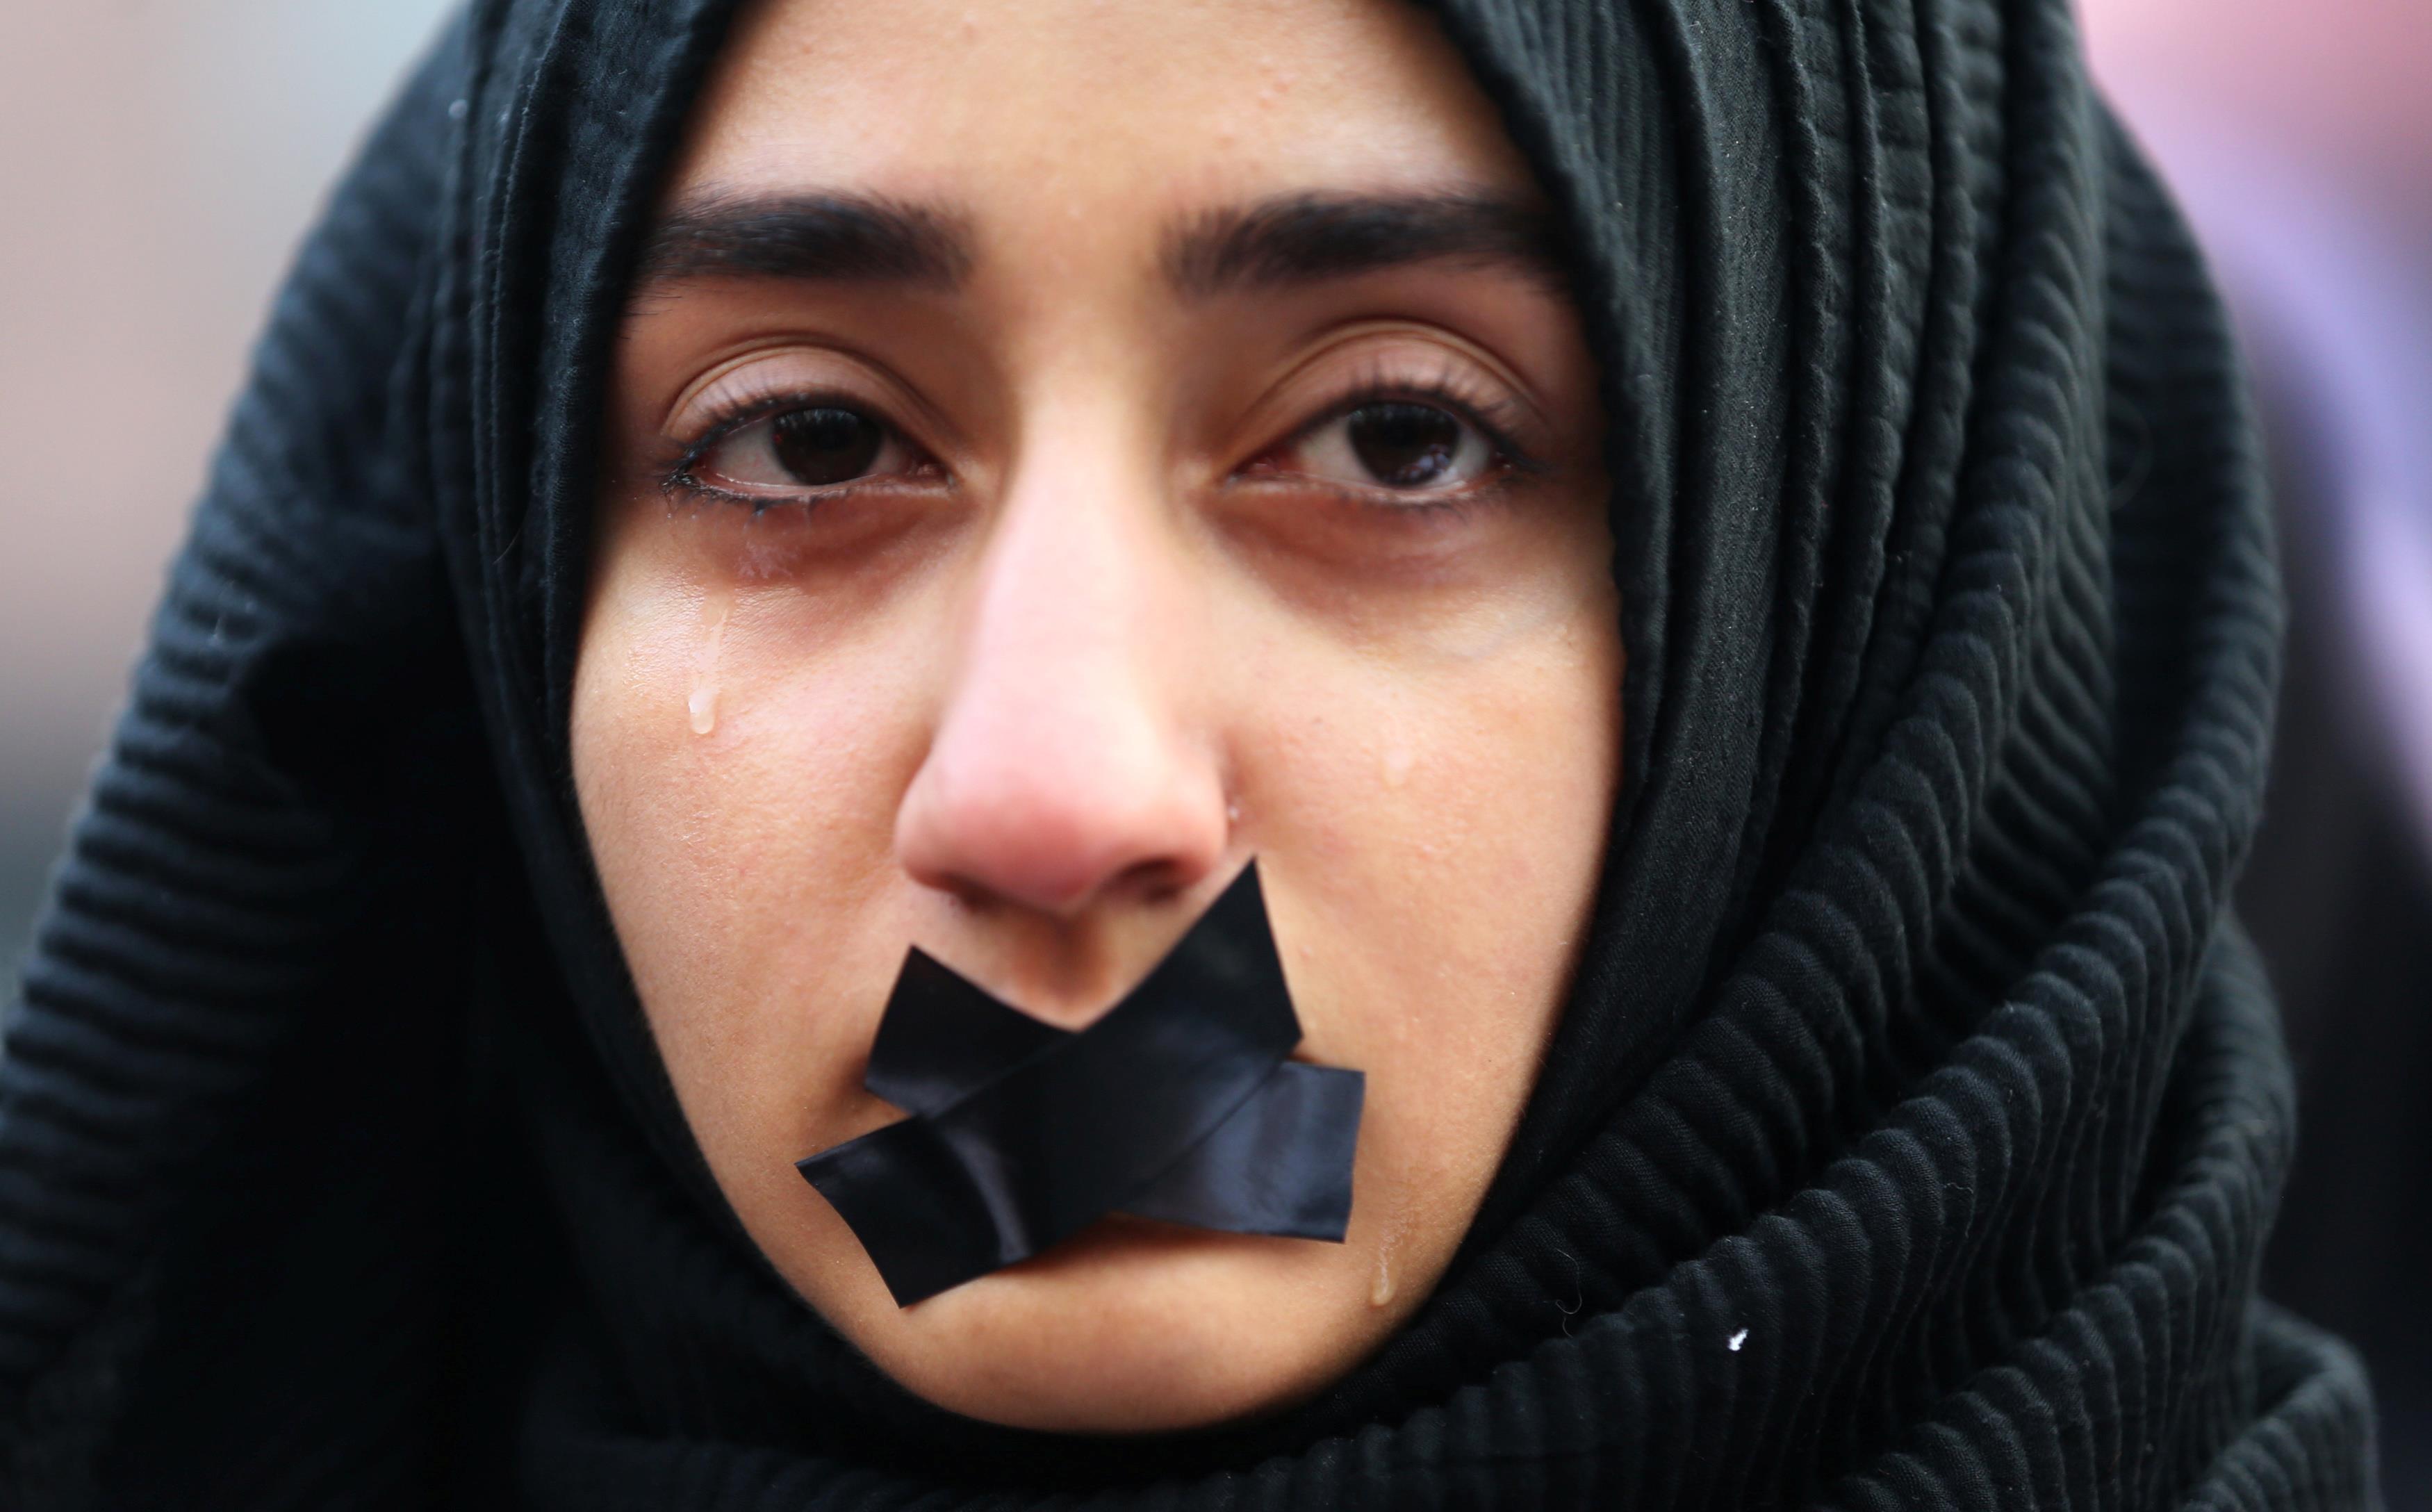 A Turkish student cries during a protest to show solidarity with trapped citizens of Aleppo, Syria, 